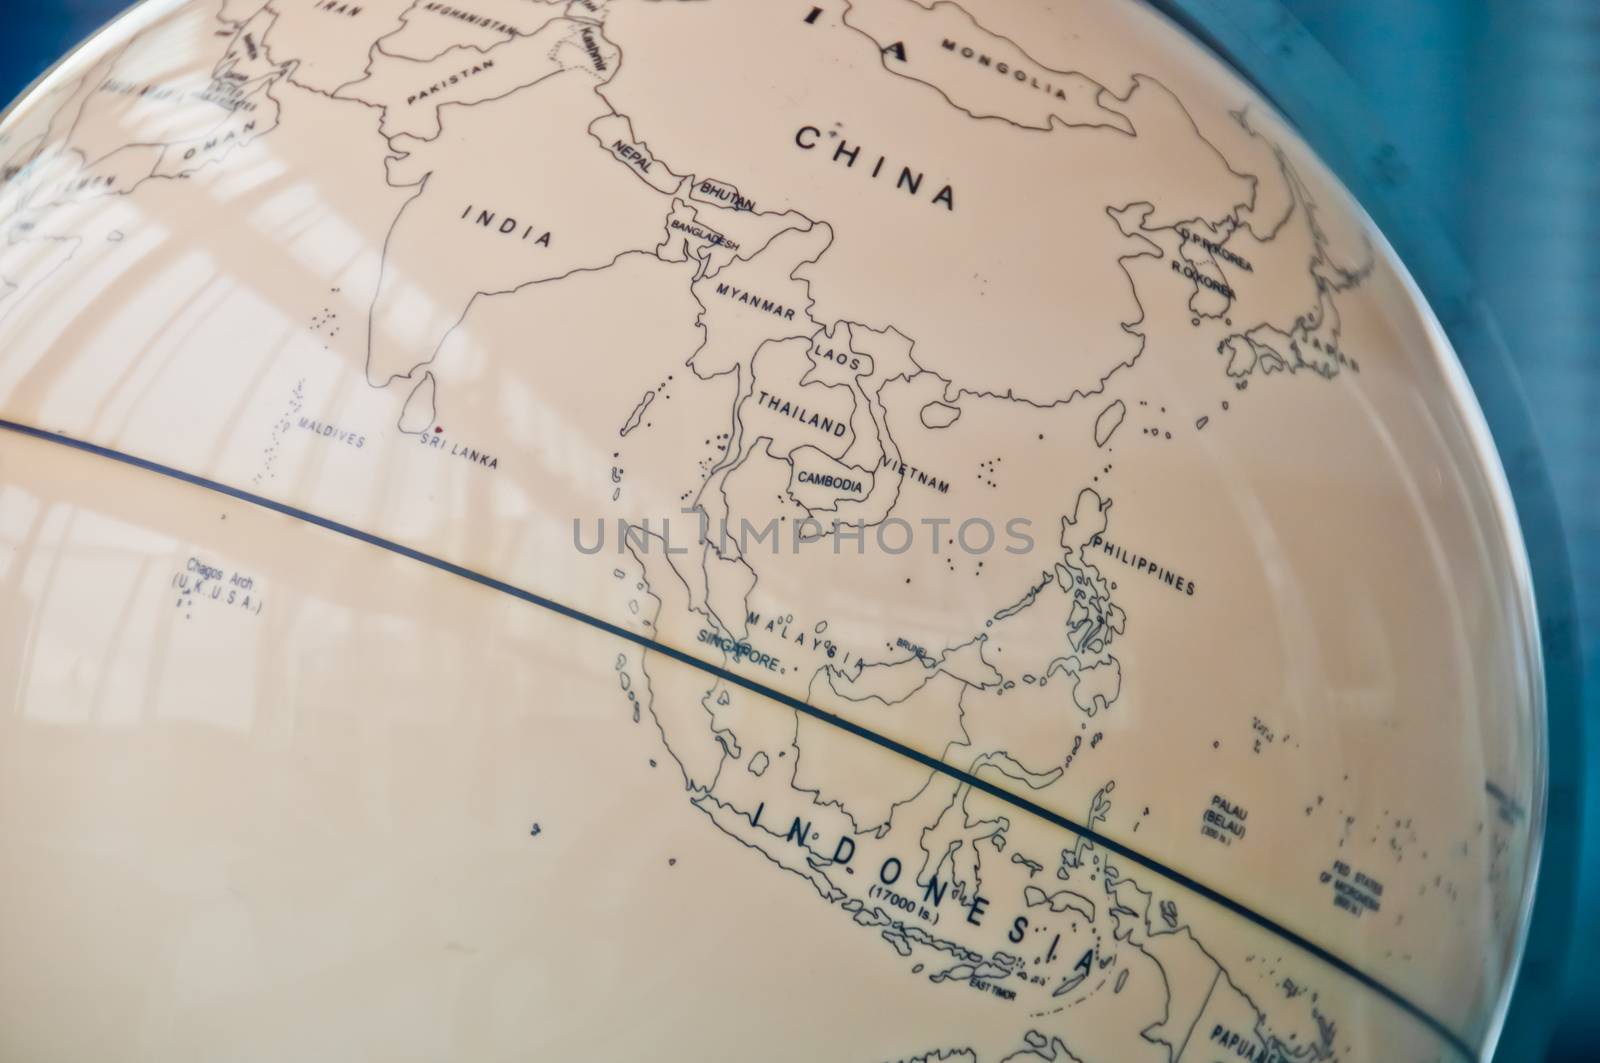 China India and South East Asia countries map in a retro old cla by eyeofpaul